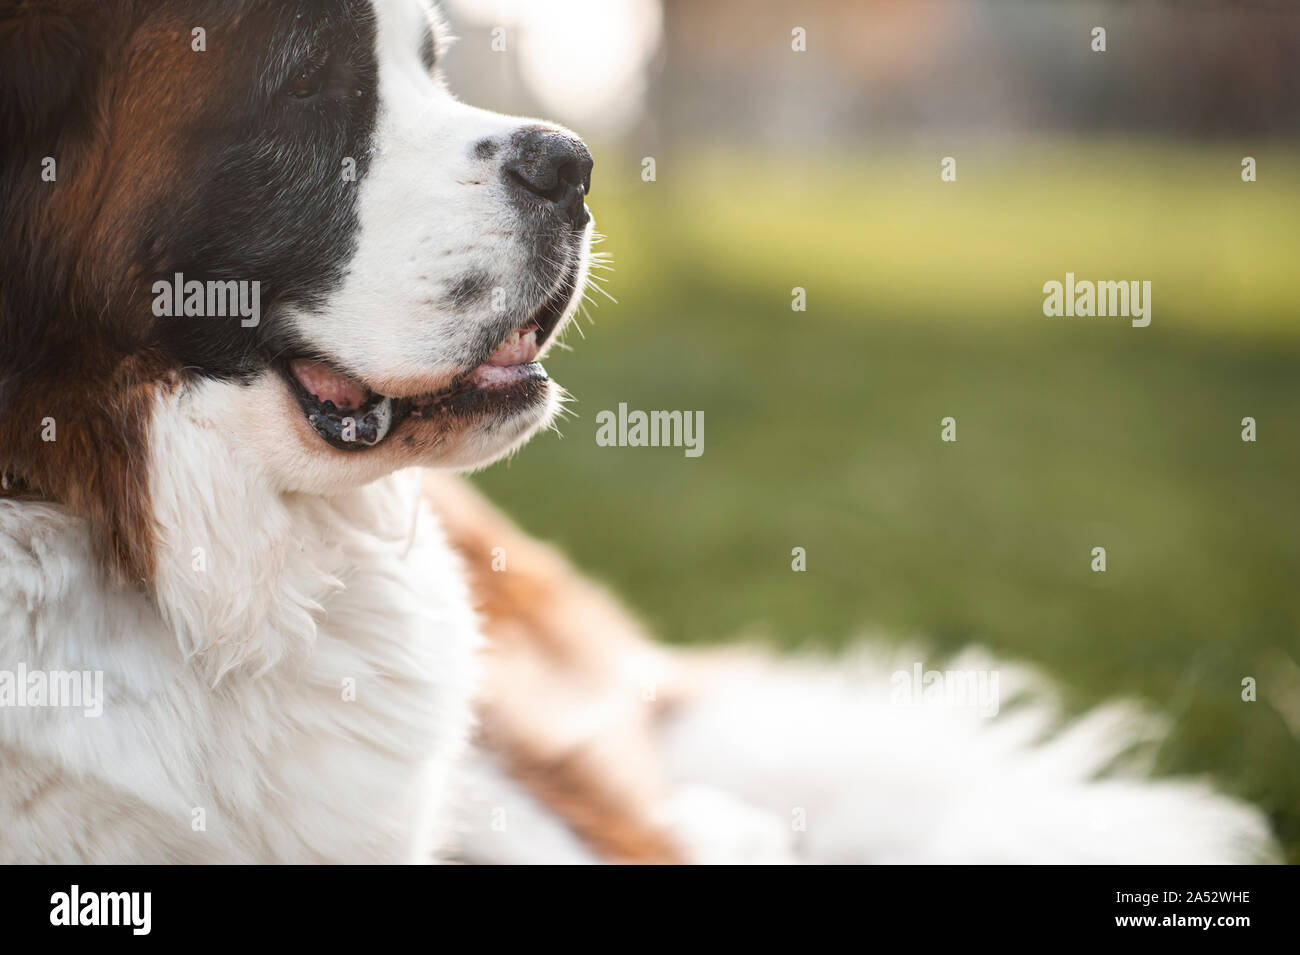 Profile of  Saint Bernard dog looking off to the side outdoors Stock Photo